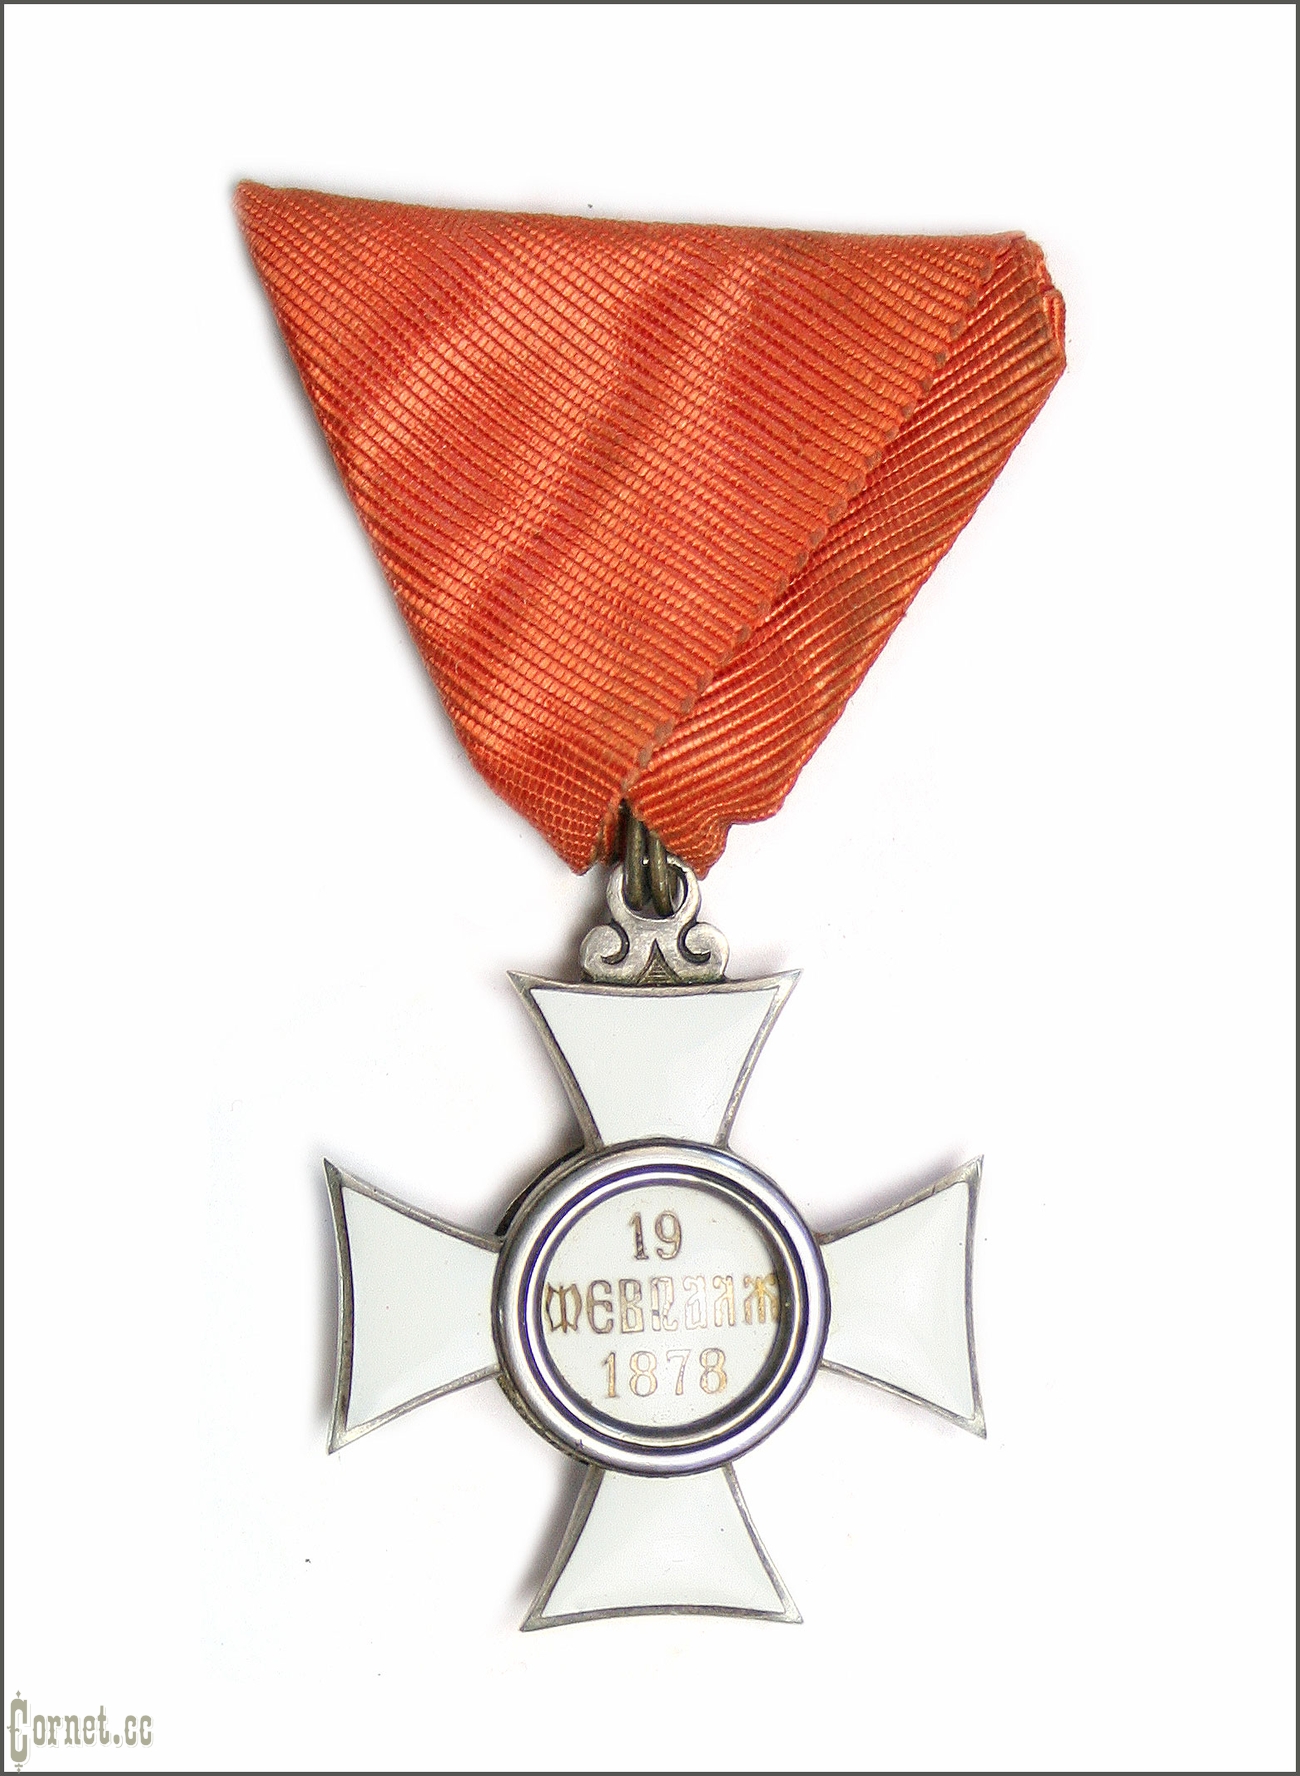 St. Alexander's award of the 5th class.